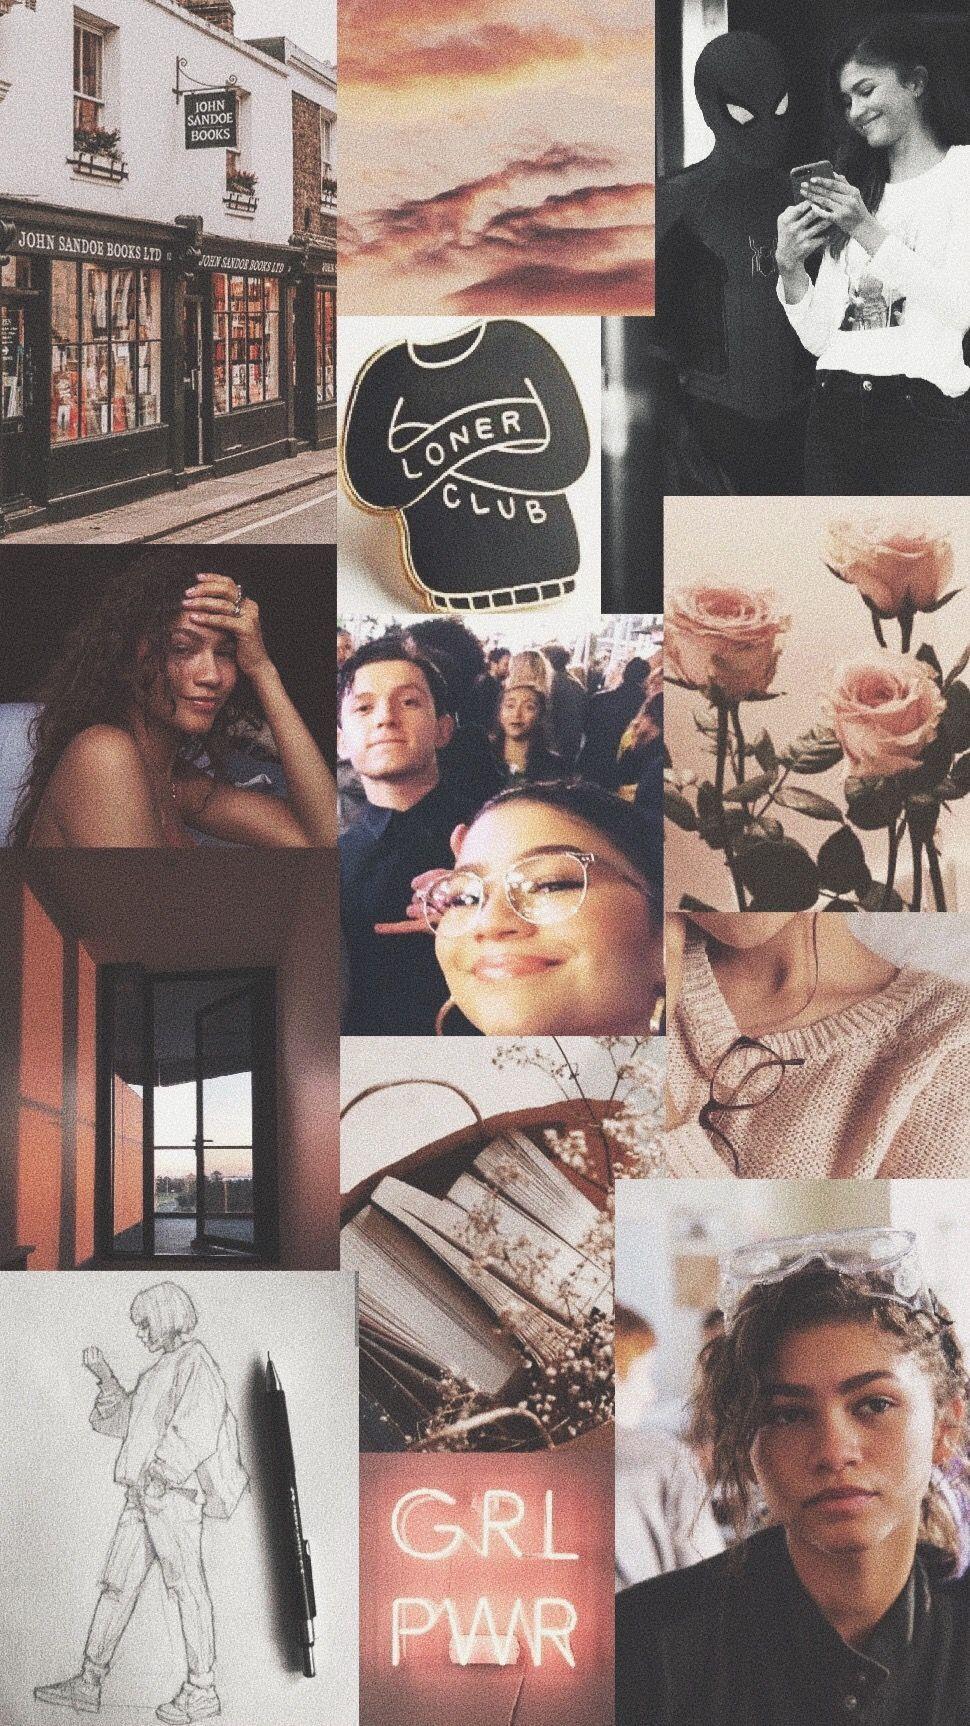 Aesthetic background with a collage of images including a book store, a girl, a rose, a pen, and a shirt that says 